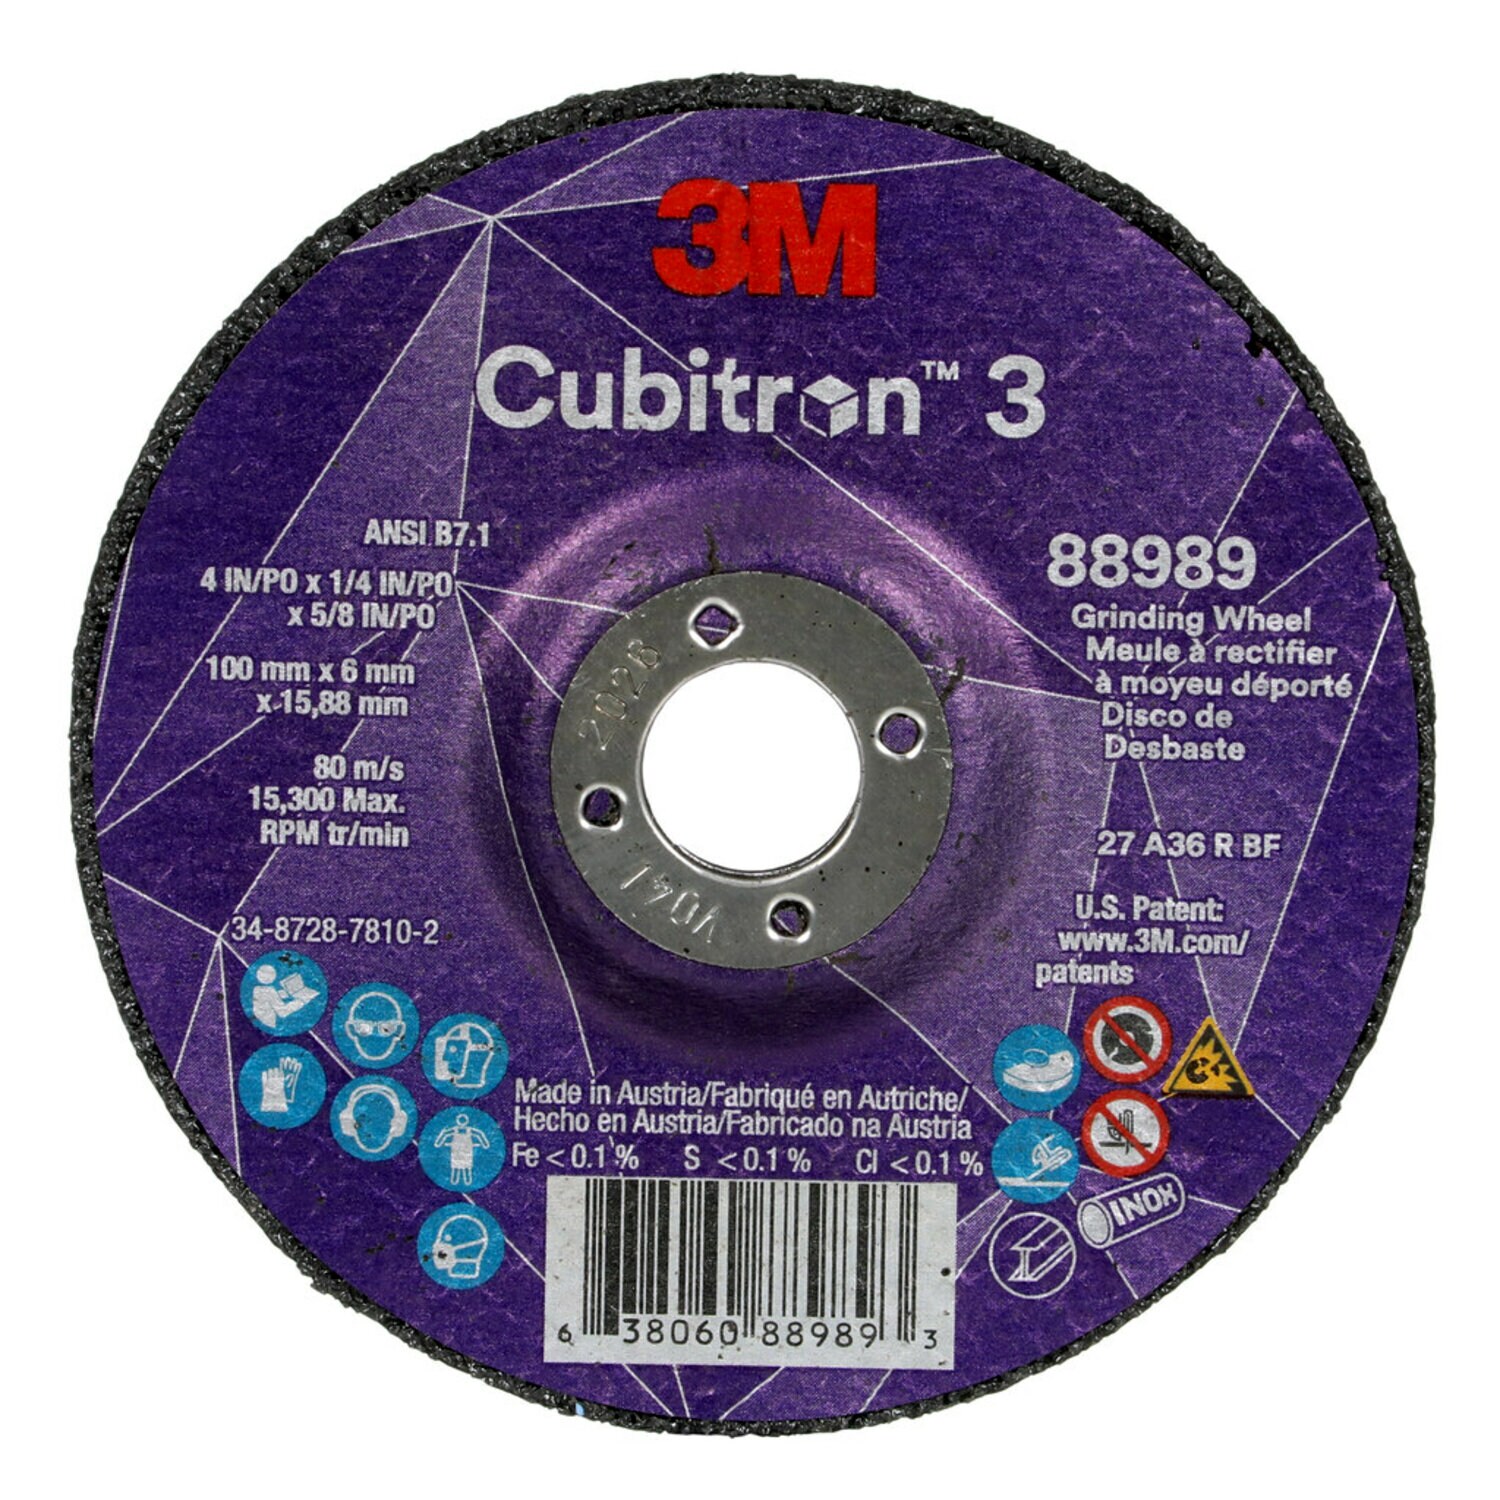 7100303964 - 3M Cubitron 3 Depressed Center Grinding Wheel, 88989, 36+, T27, 4 in x
1/4 in x 5/8 in (100x6x15.88mm) ANSI, 10/Pack, 20 ea/Case